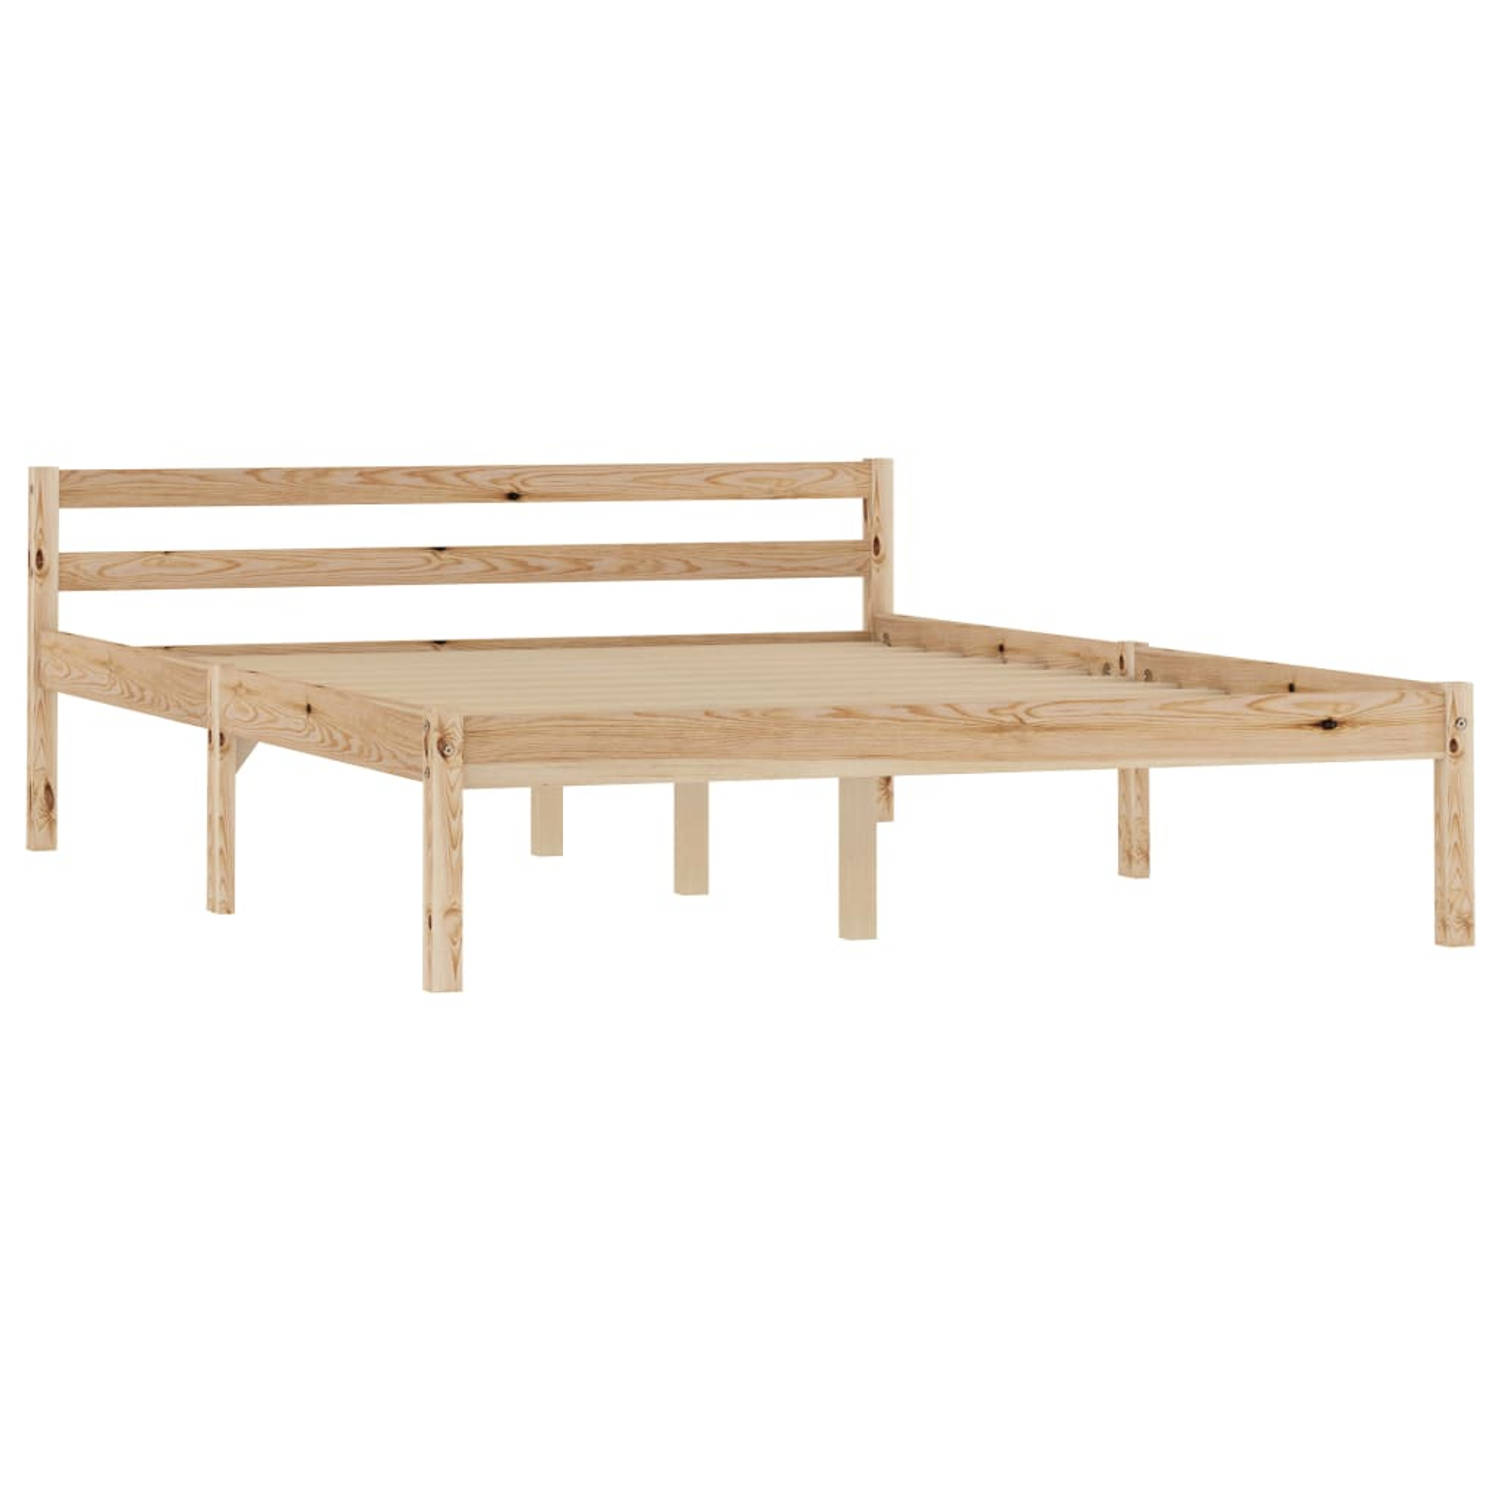 The Living Store Bedframe massief grenenhout 140x200 cm - Bed